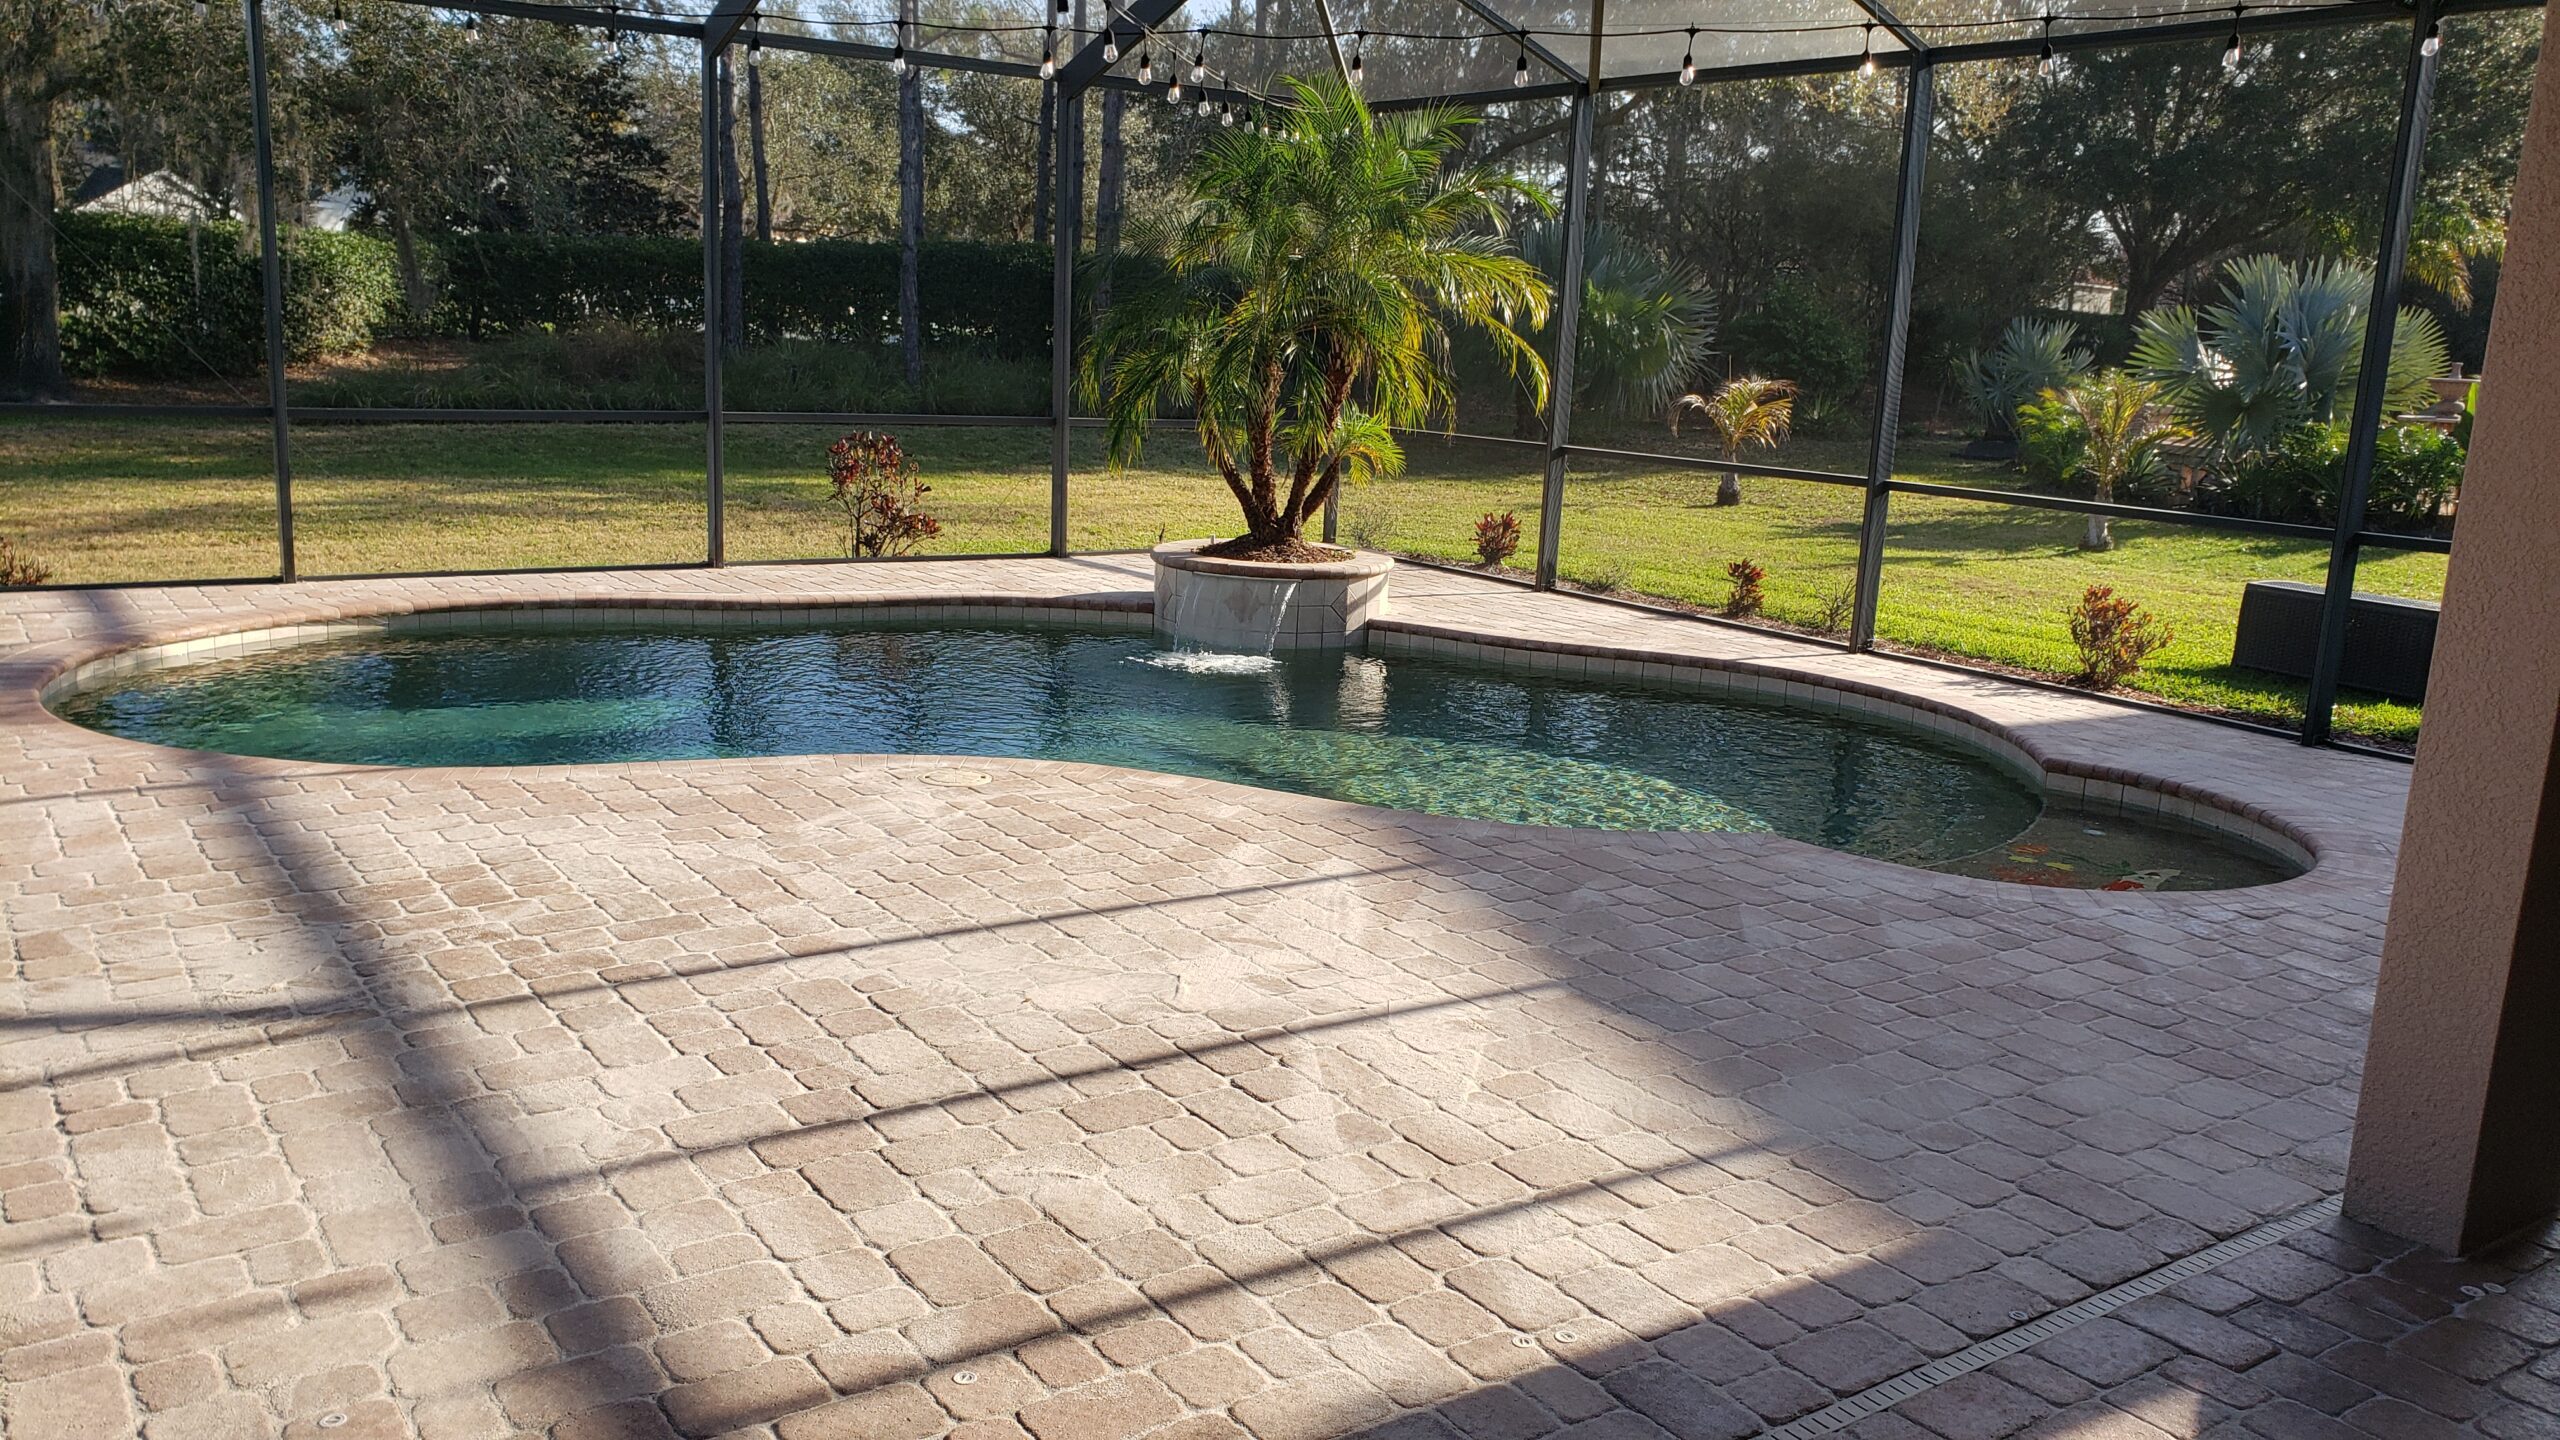 Unstained, worn-out pool deck before transformation